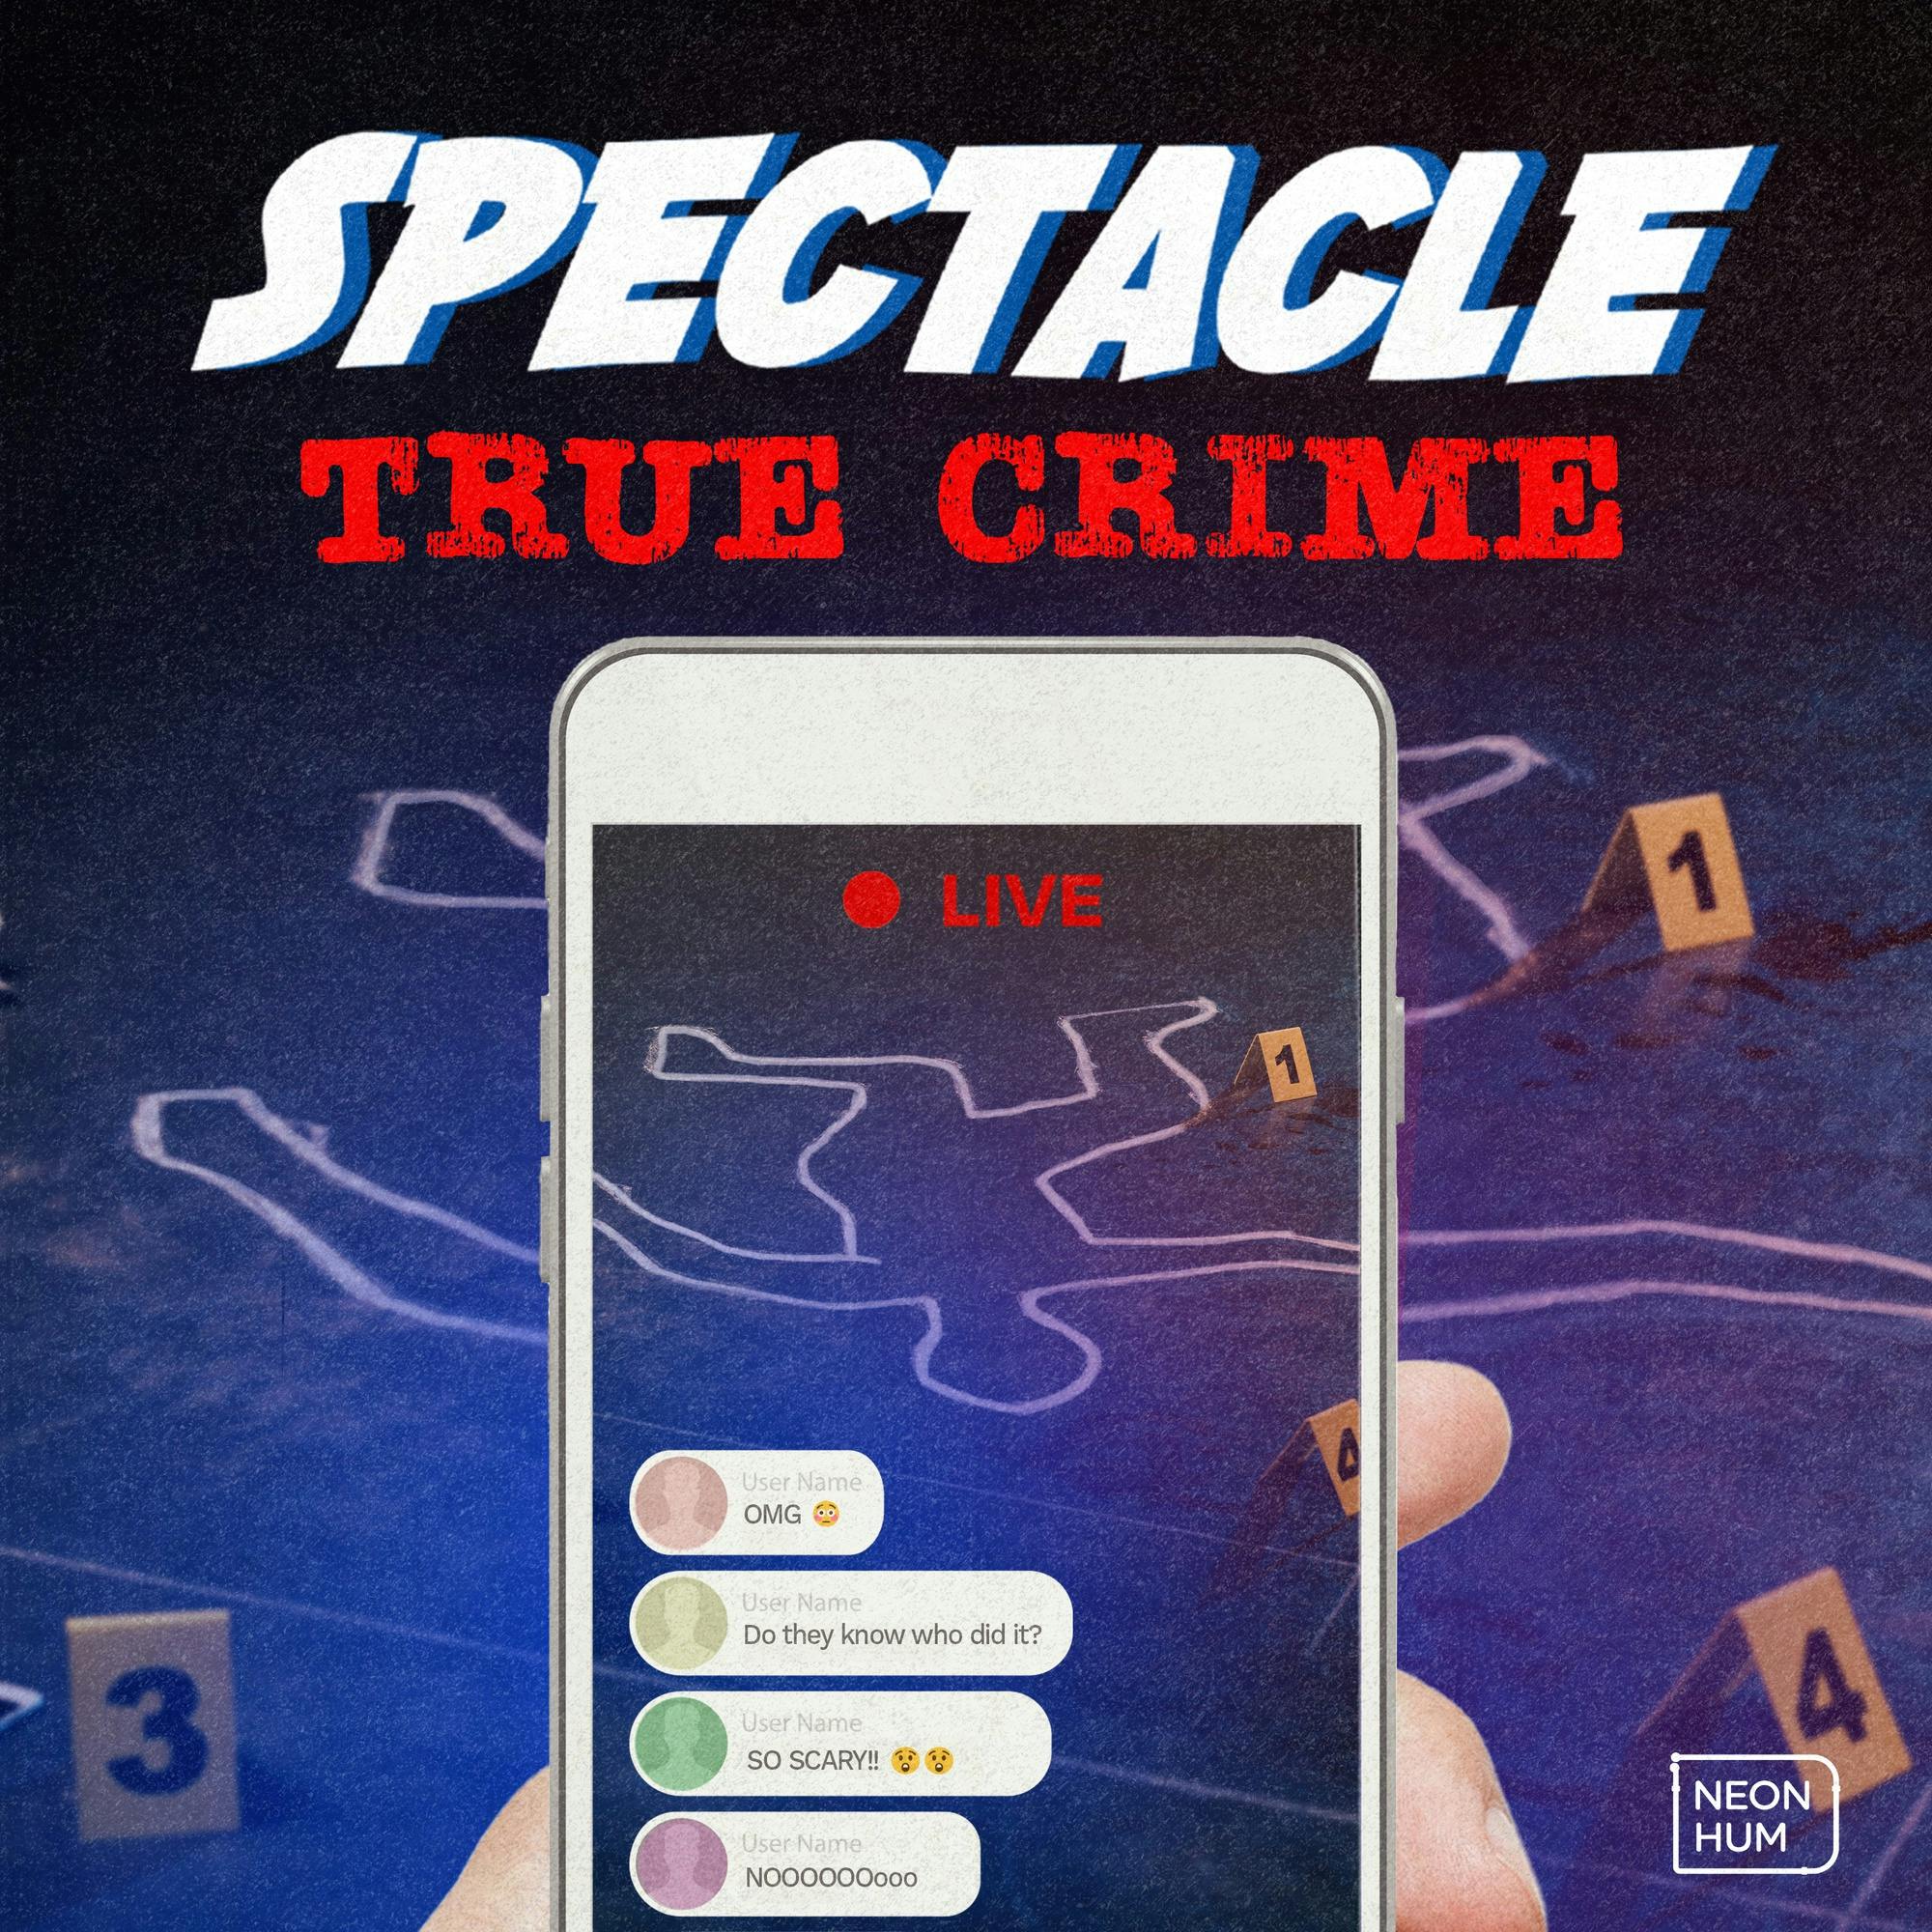 Introducing Spectacle: True Crime